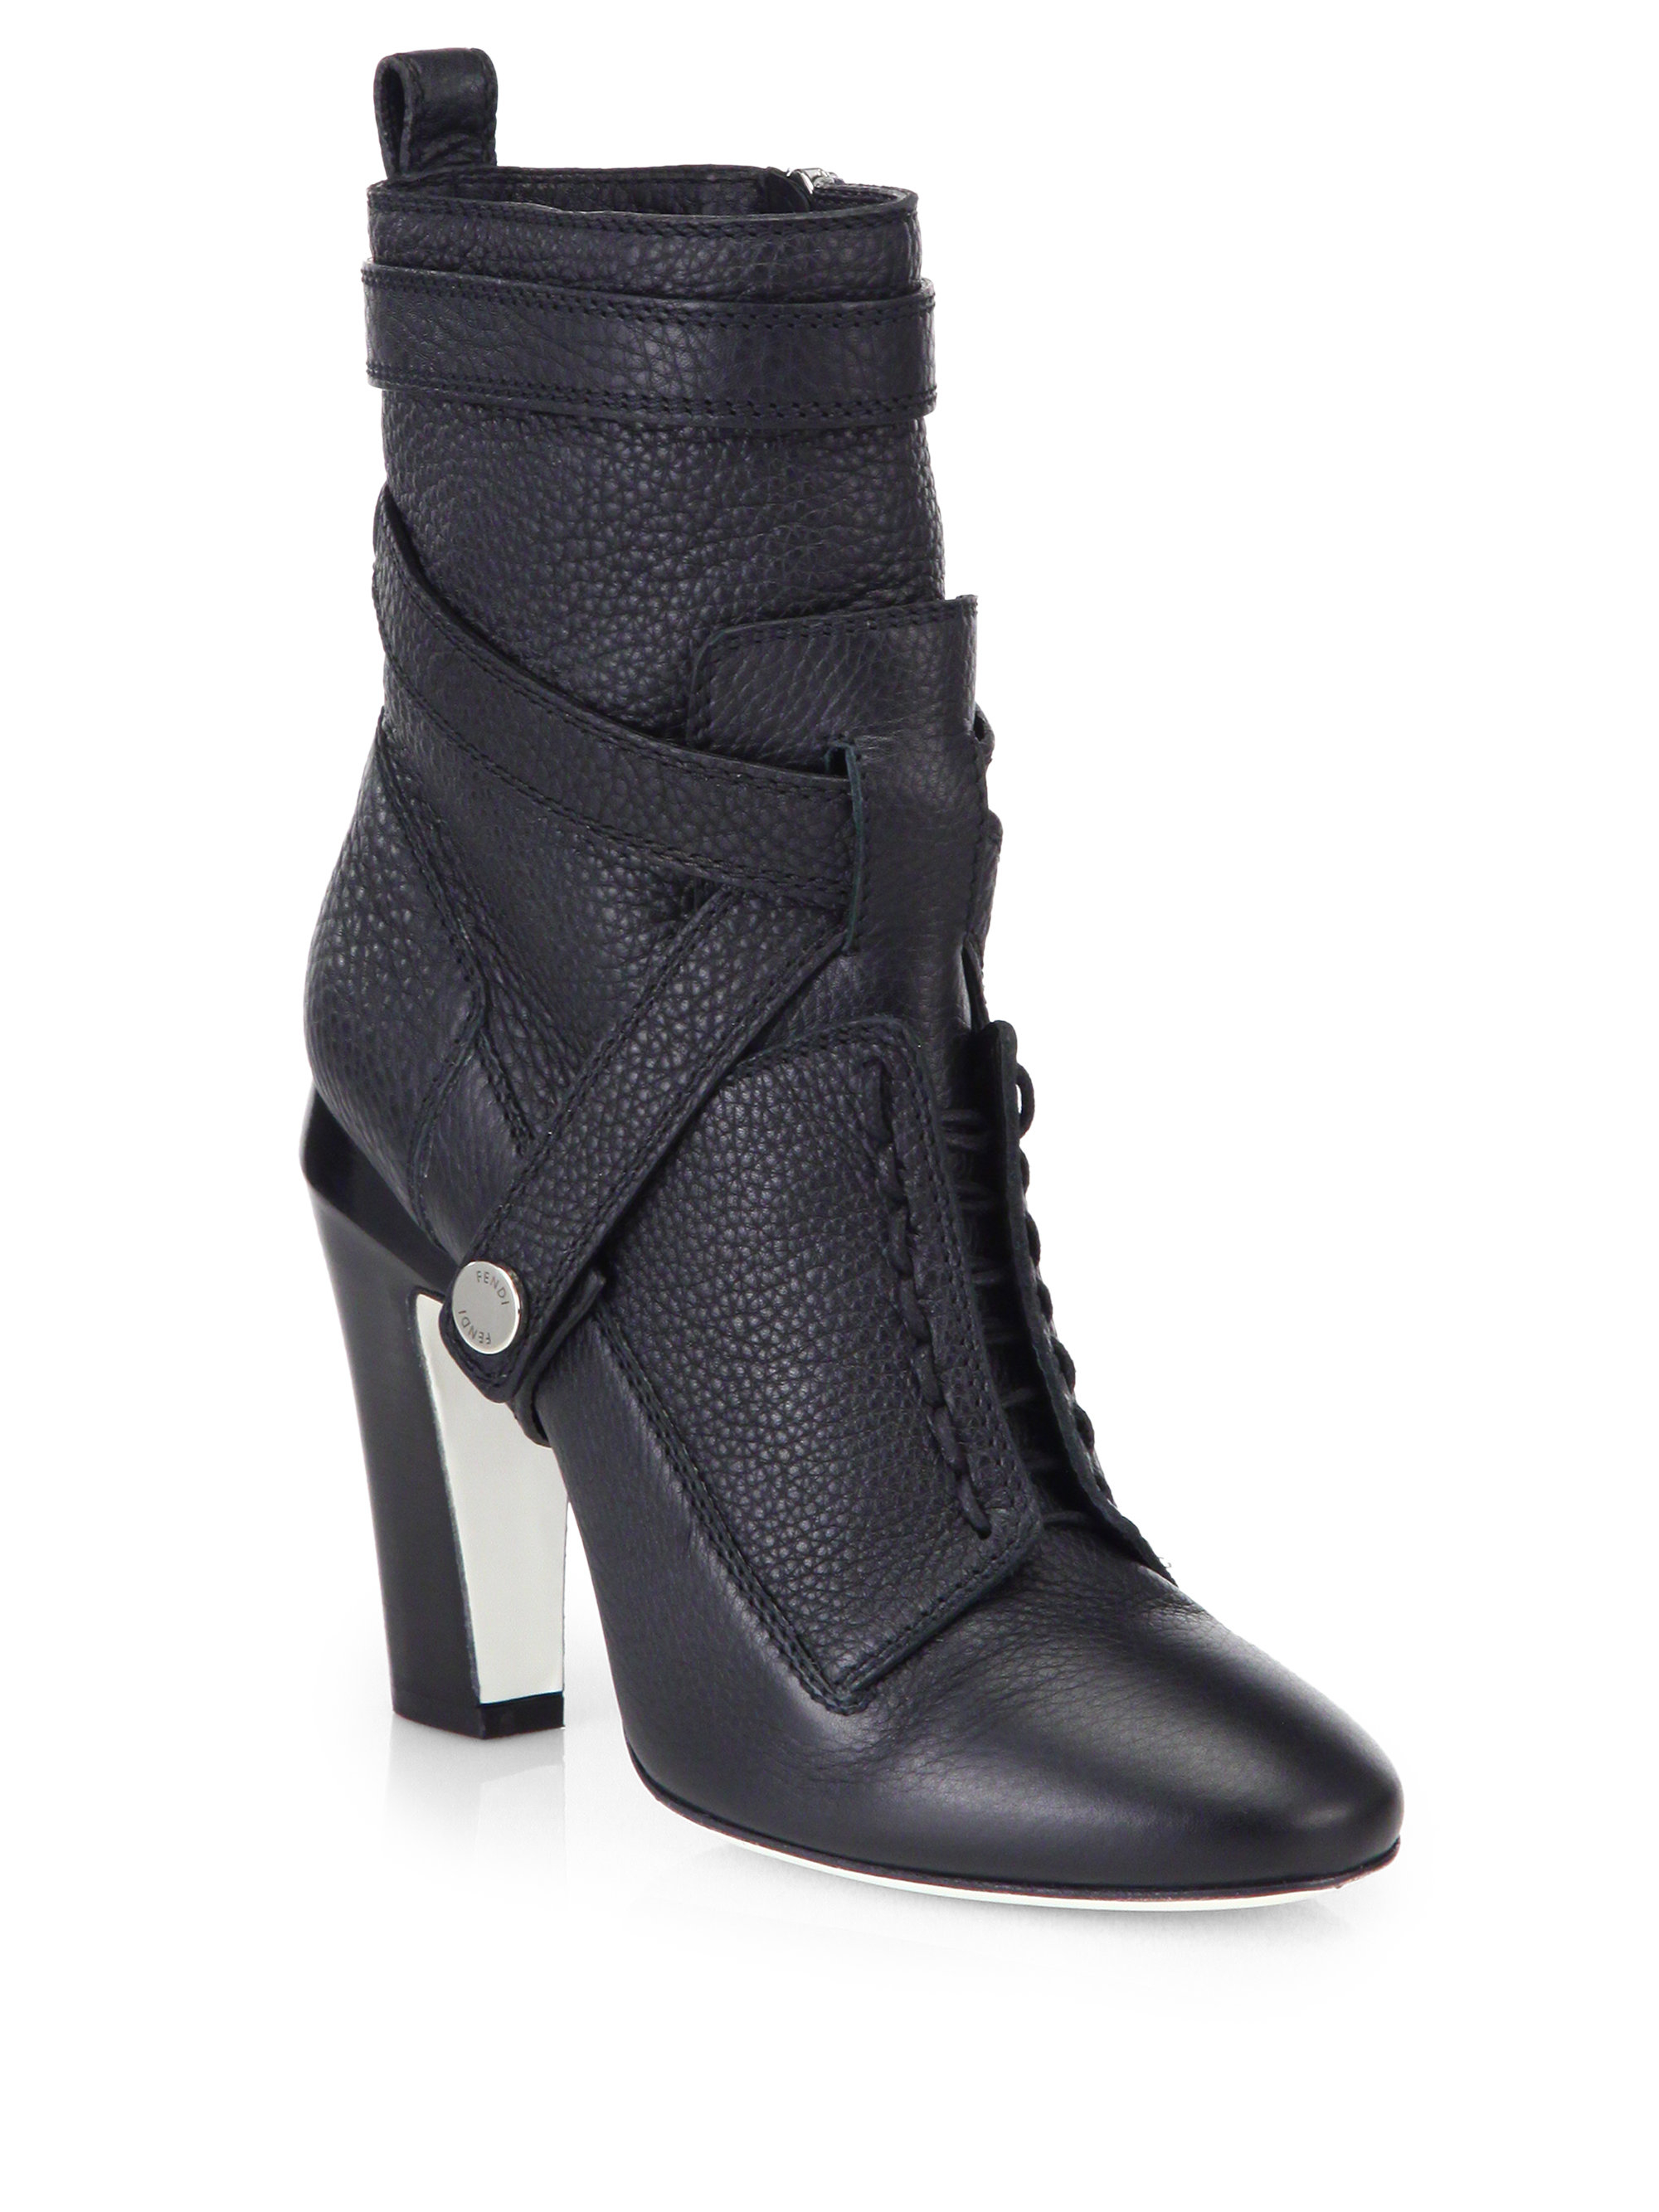 Lyst - Fendi Diana 105Mm Leather Ankle Boots in Black